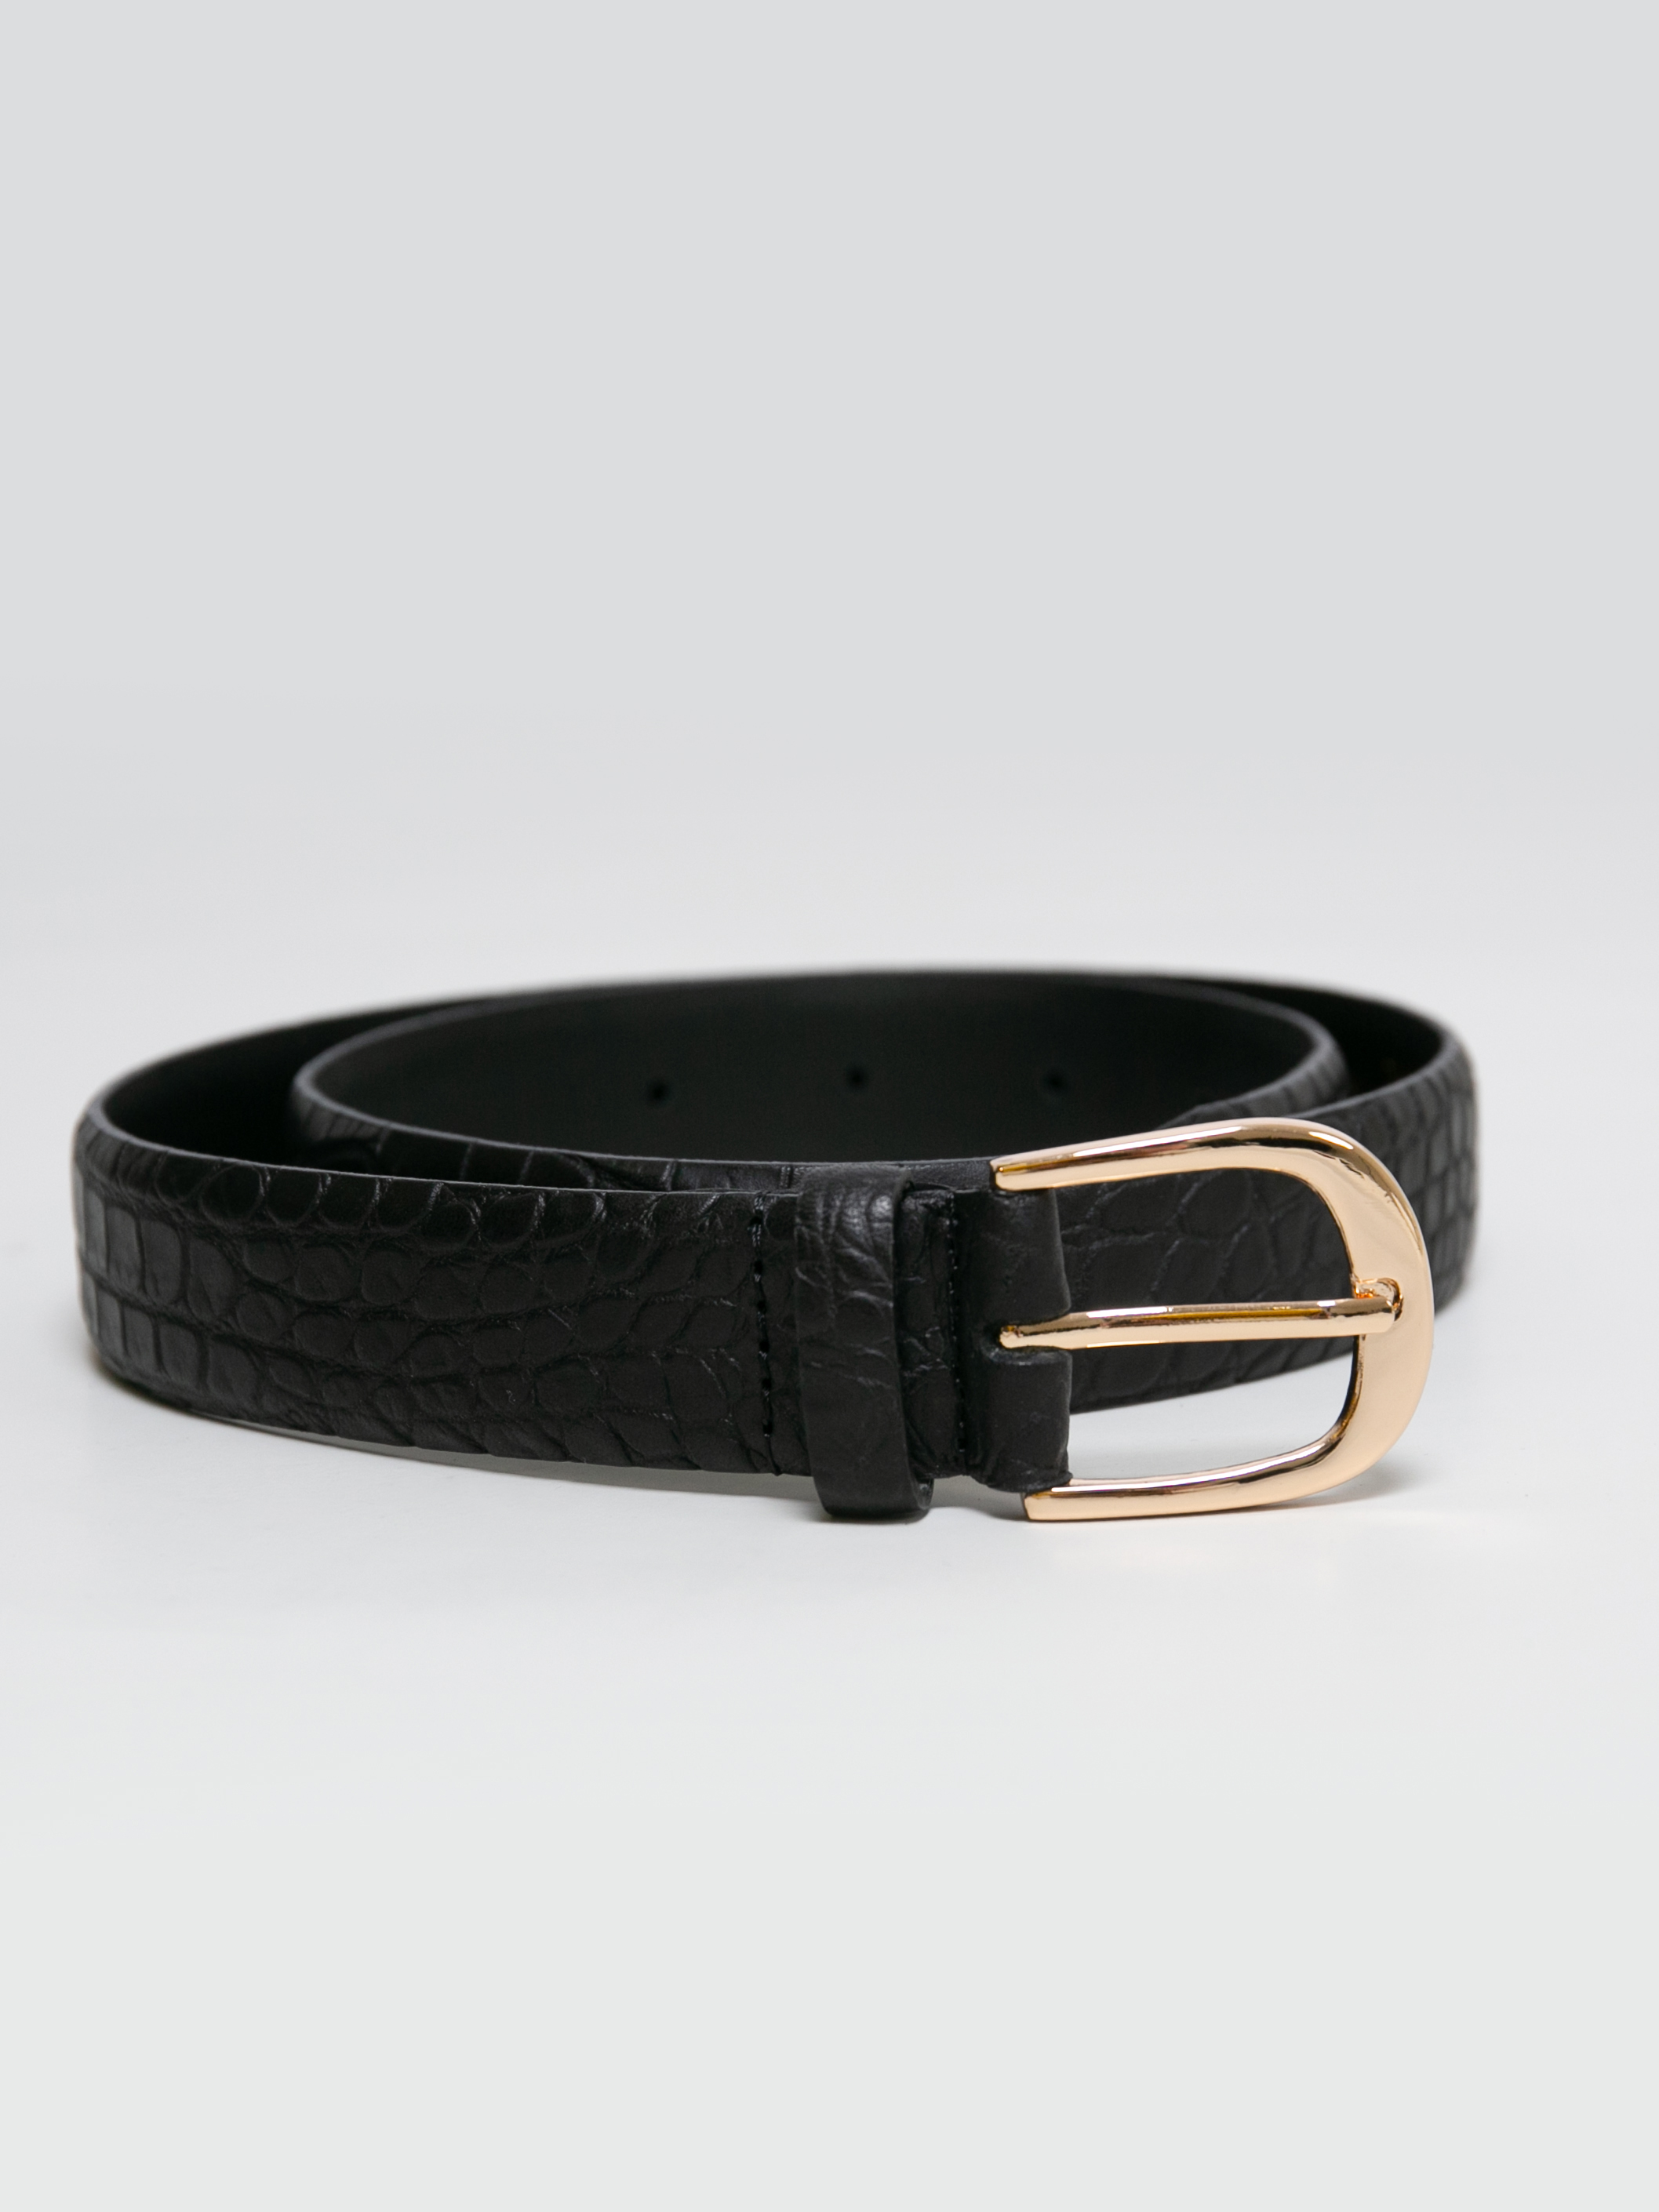 Big Star Woman's Belt 240094  Natural Leather-906